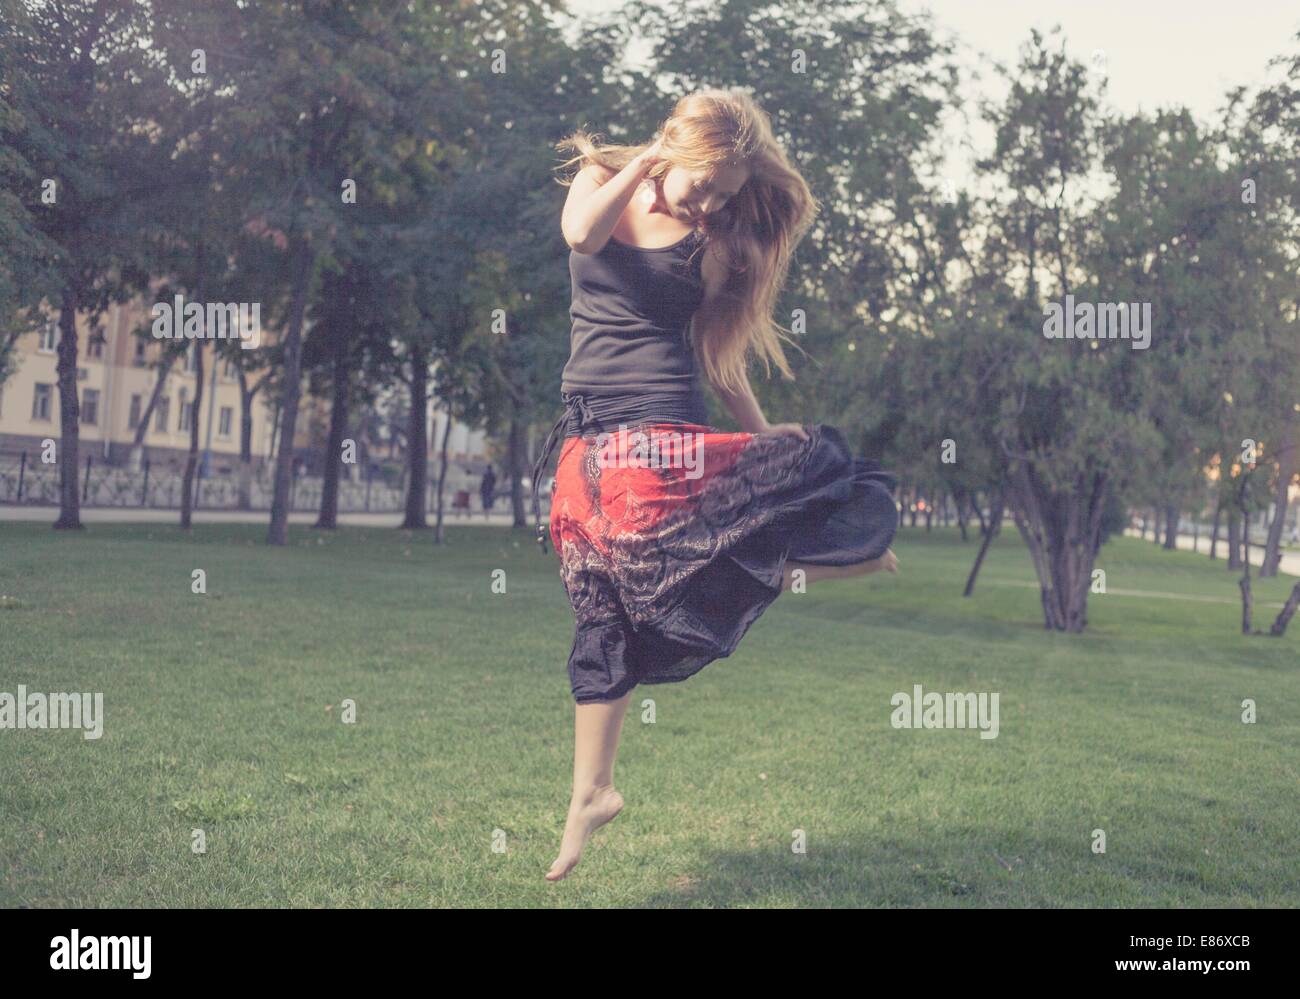 The young female jumps on a green grass in evening time in city park . Girl jumping like flying bird. Stock Photo